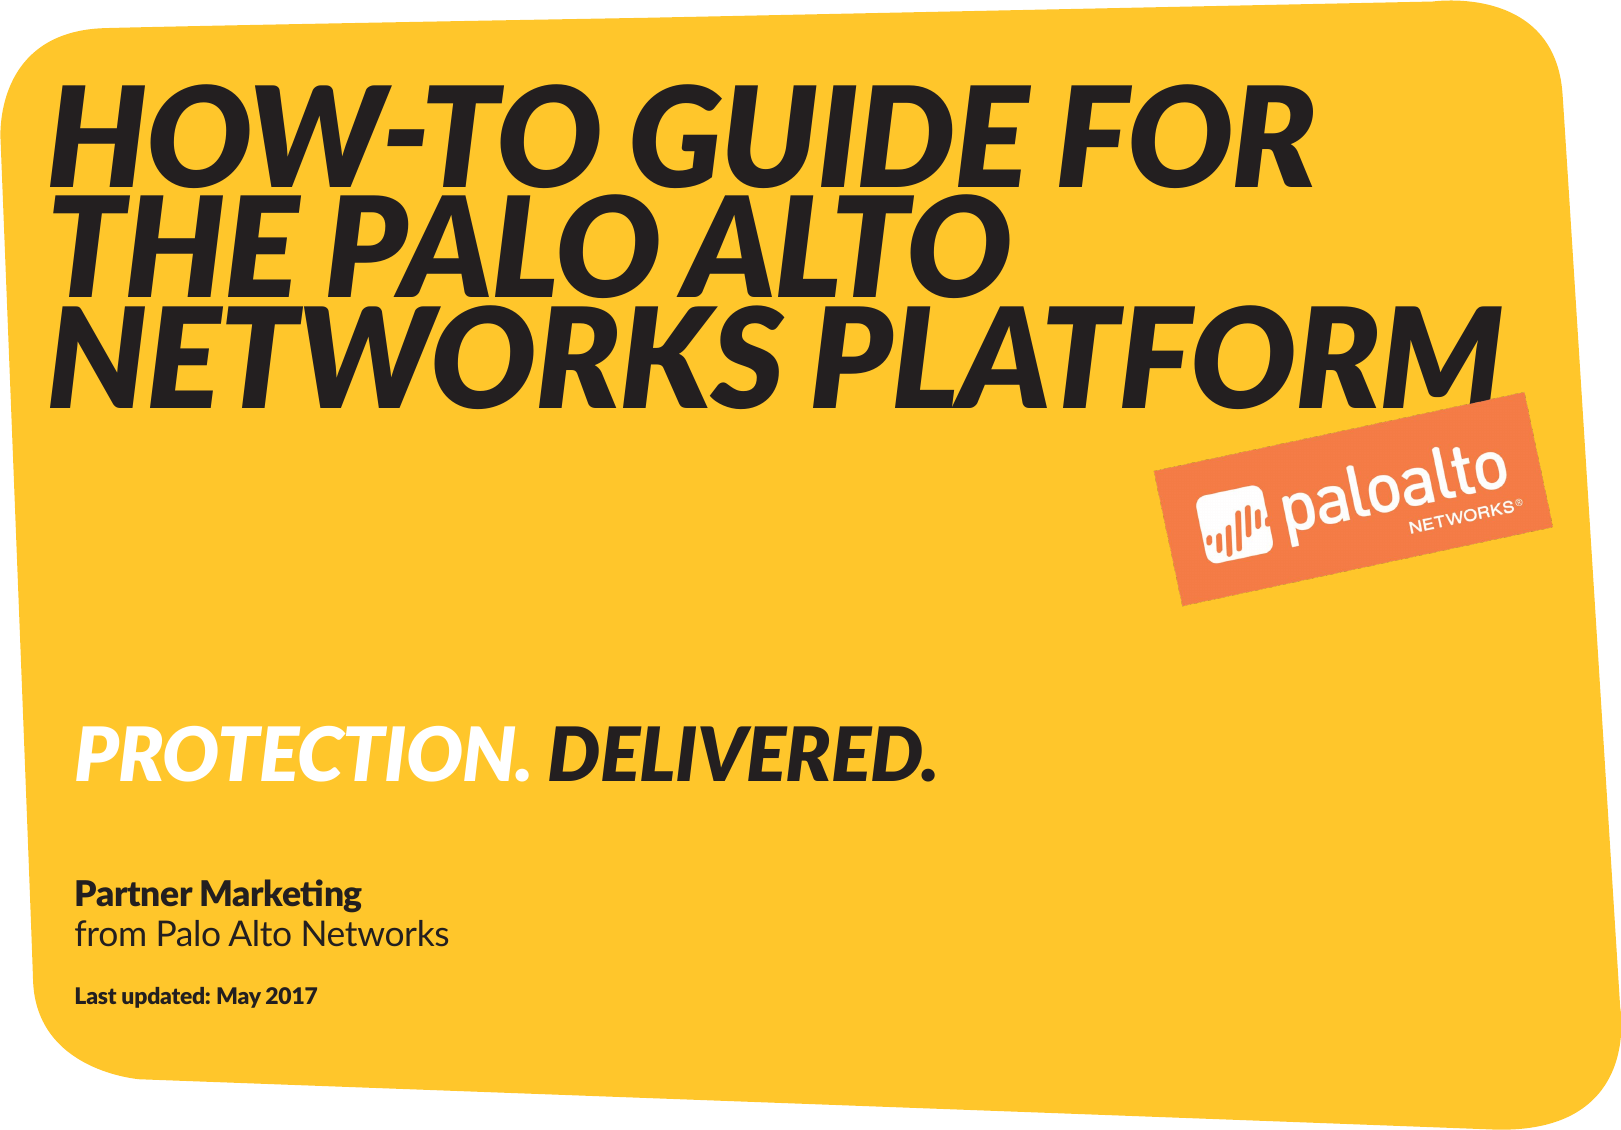 Page 1 of 9 - How-to-guide-palo-alto-networks-platform